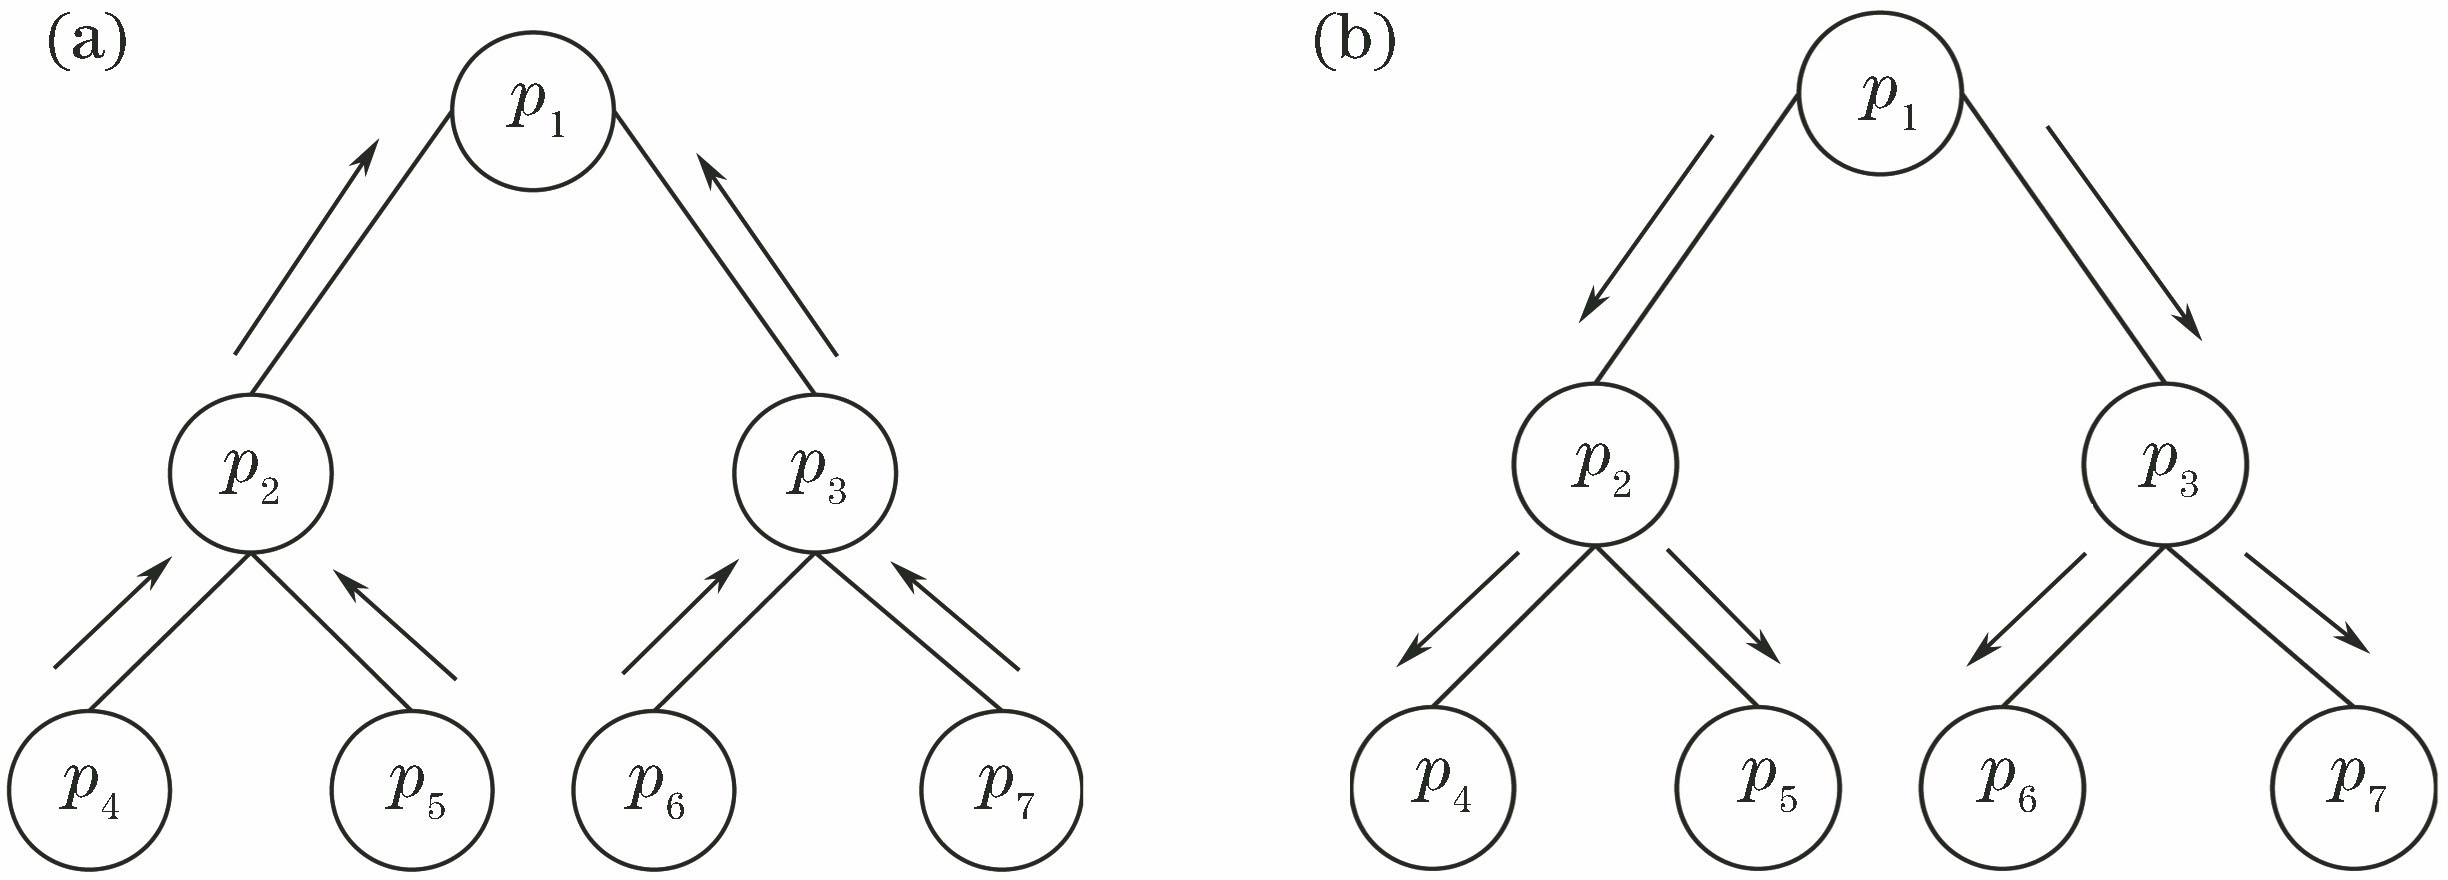 First cost aggregation based on minimum spanning tree. (a) Cost aggregation from bottom to up; (b) cost aggregation from up to bottom